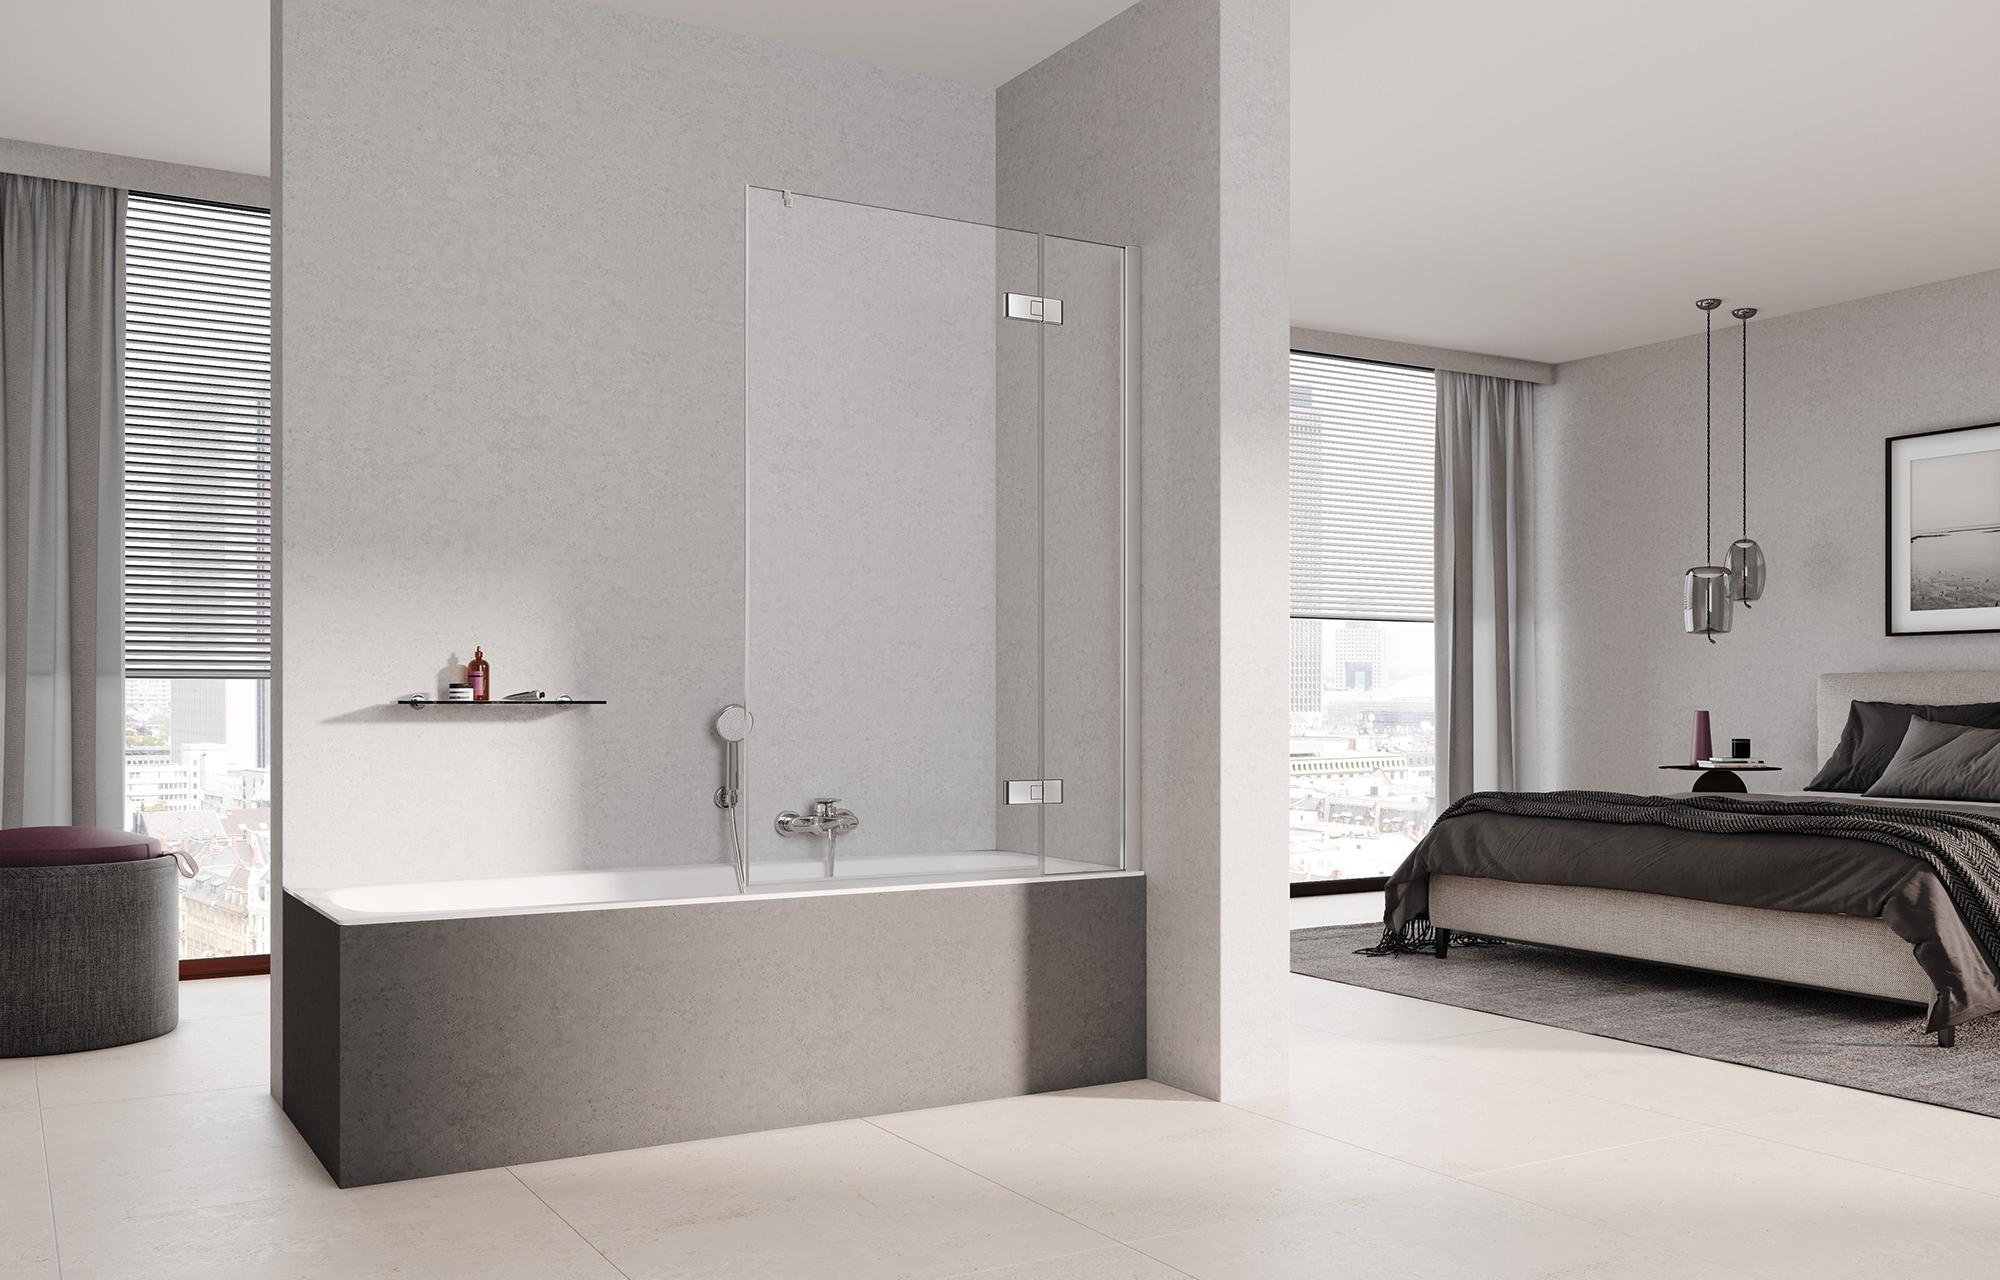 Kermi bath screen, MENA WALK-IN Wall with profile with fixed panel at an angle